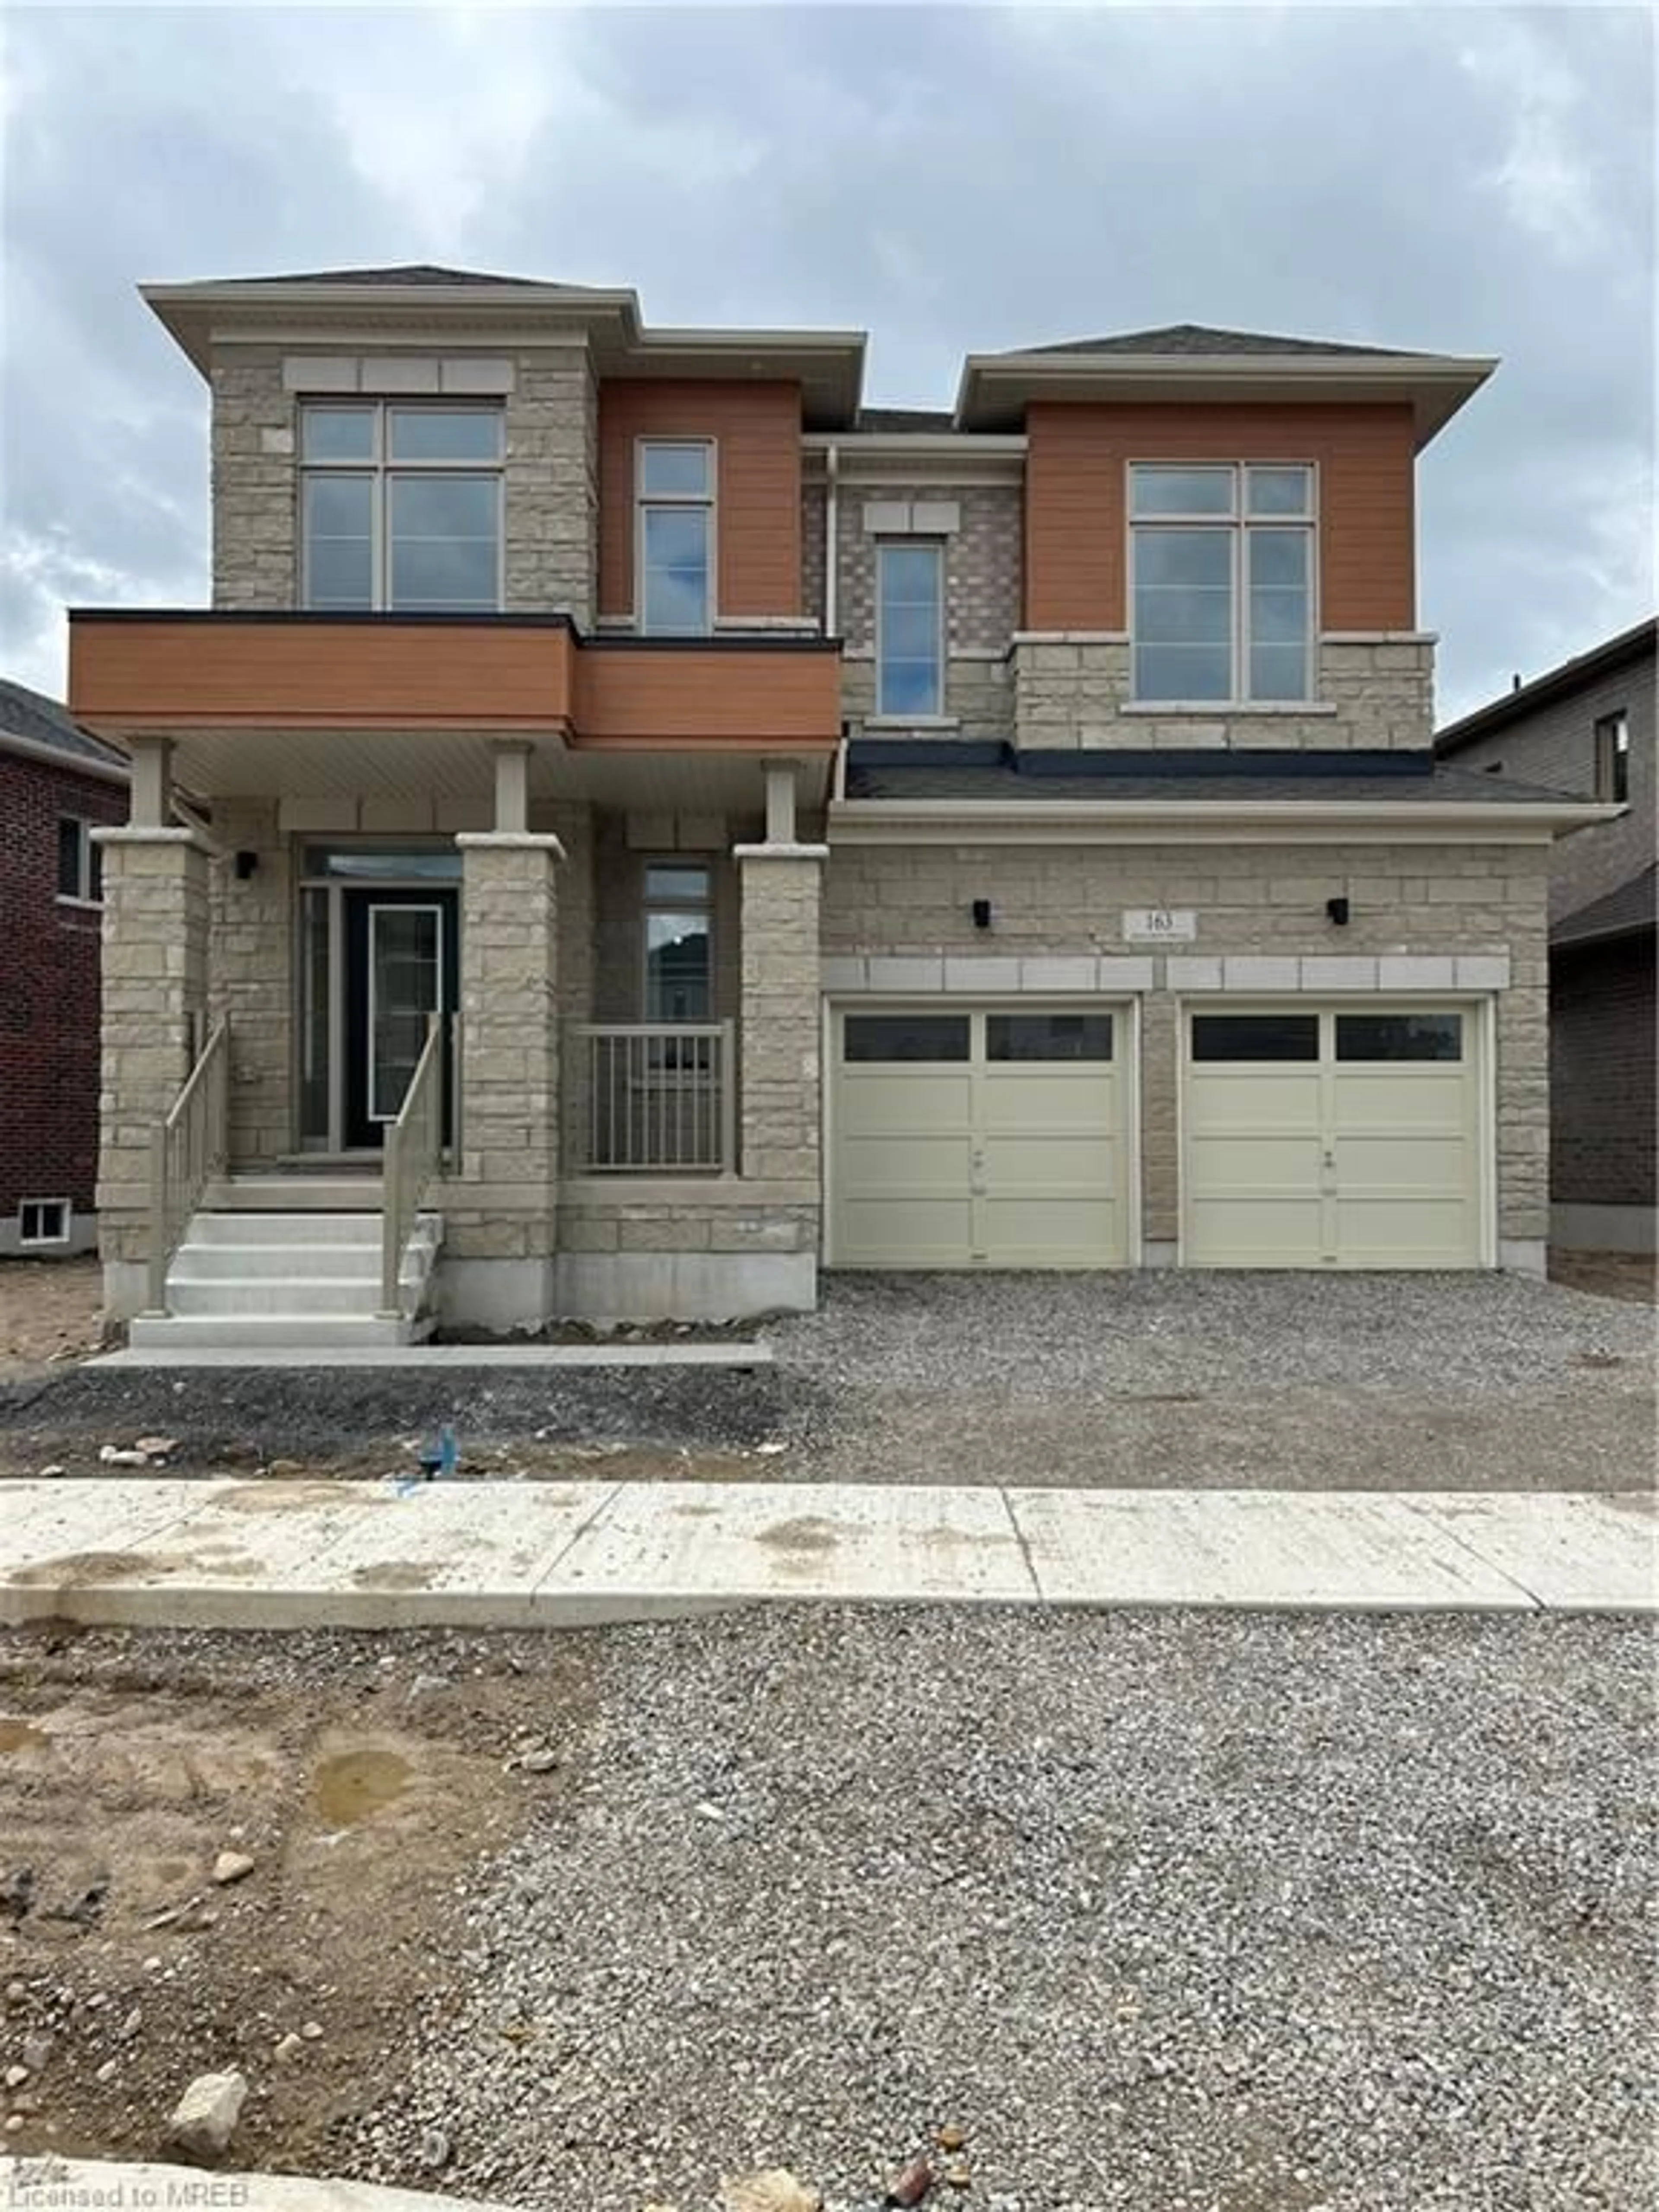 Home with brick exterior material for 163 Attwater Dr, Cambridge Ontario N1T 0G5